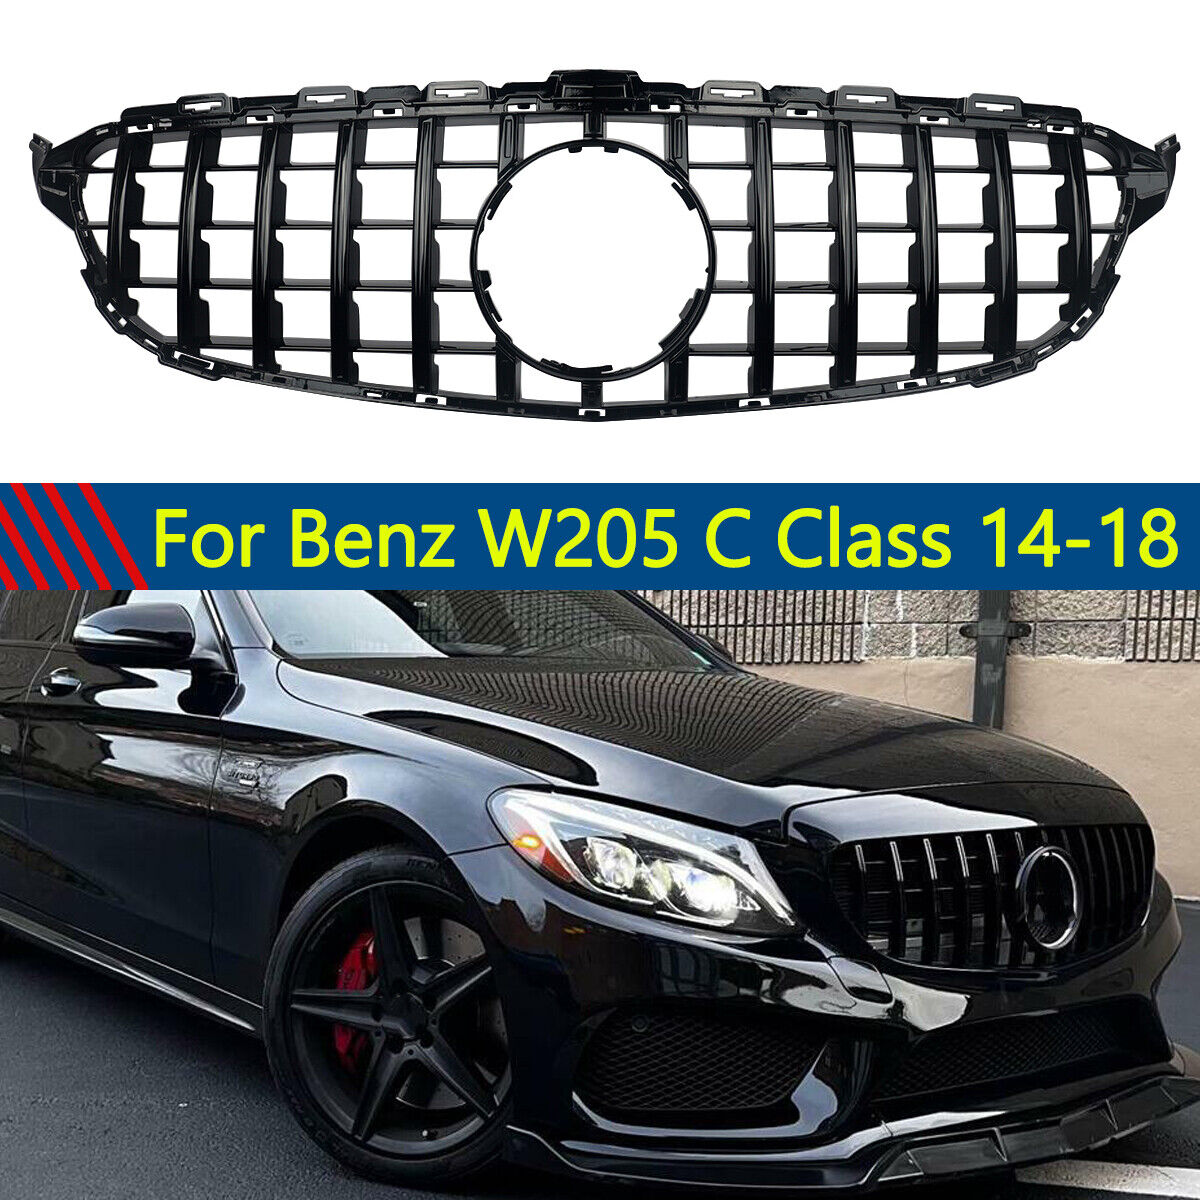 GTR Style Front Grill Gloss Black For Mercedes Benz C Class W205 2014-2018